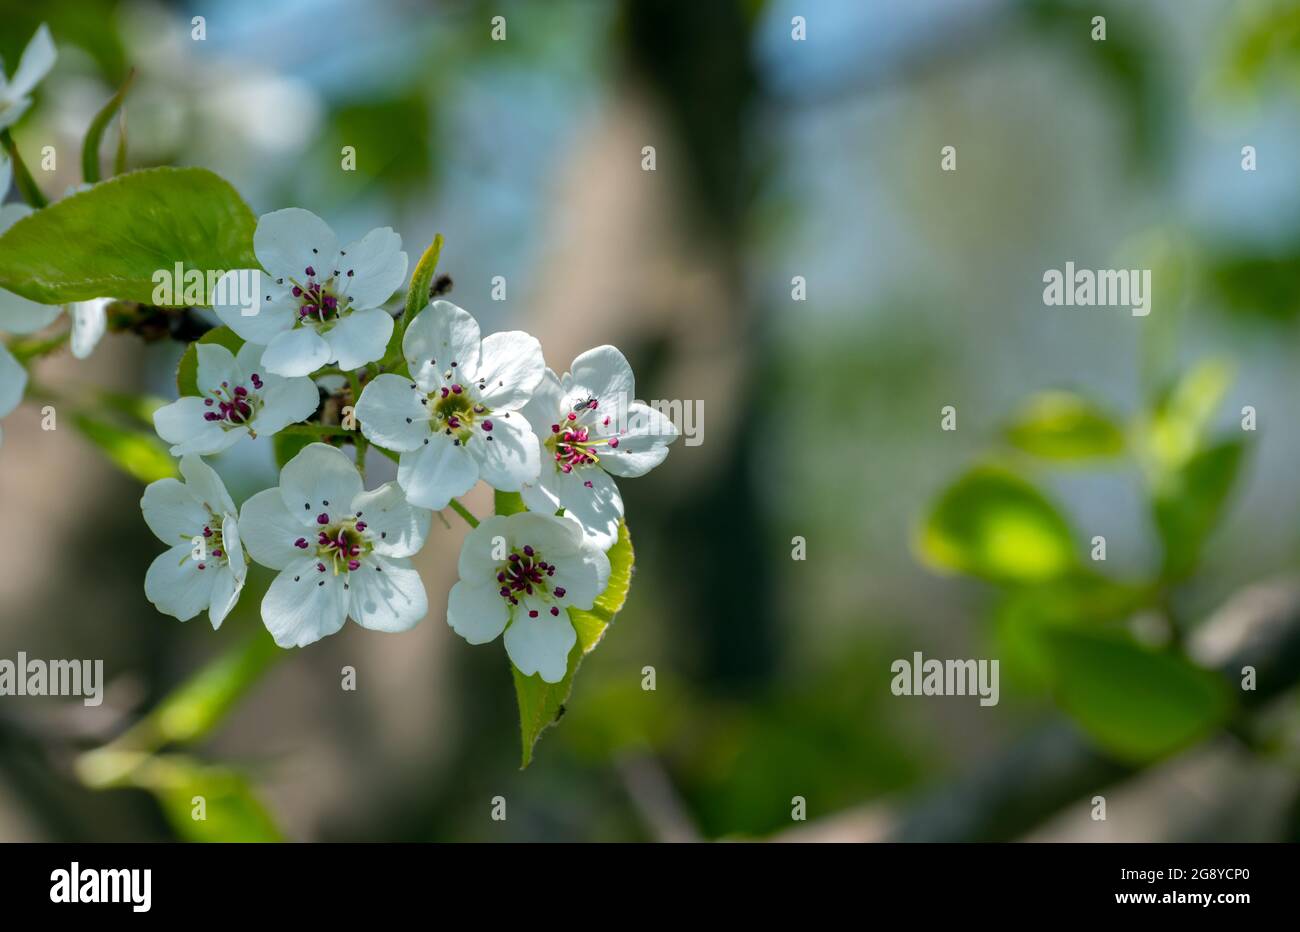 The beautiful dainty ornamental pear tree blossom is a welcome sign of spring in southwest Missouri. Bokeh effect. Stock Photo